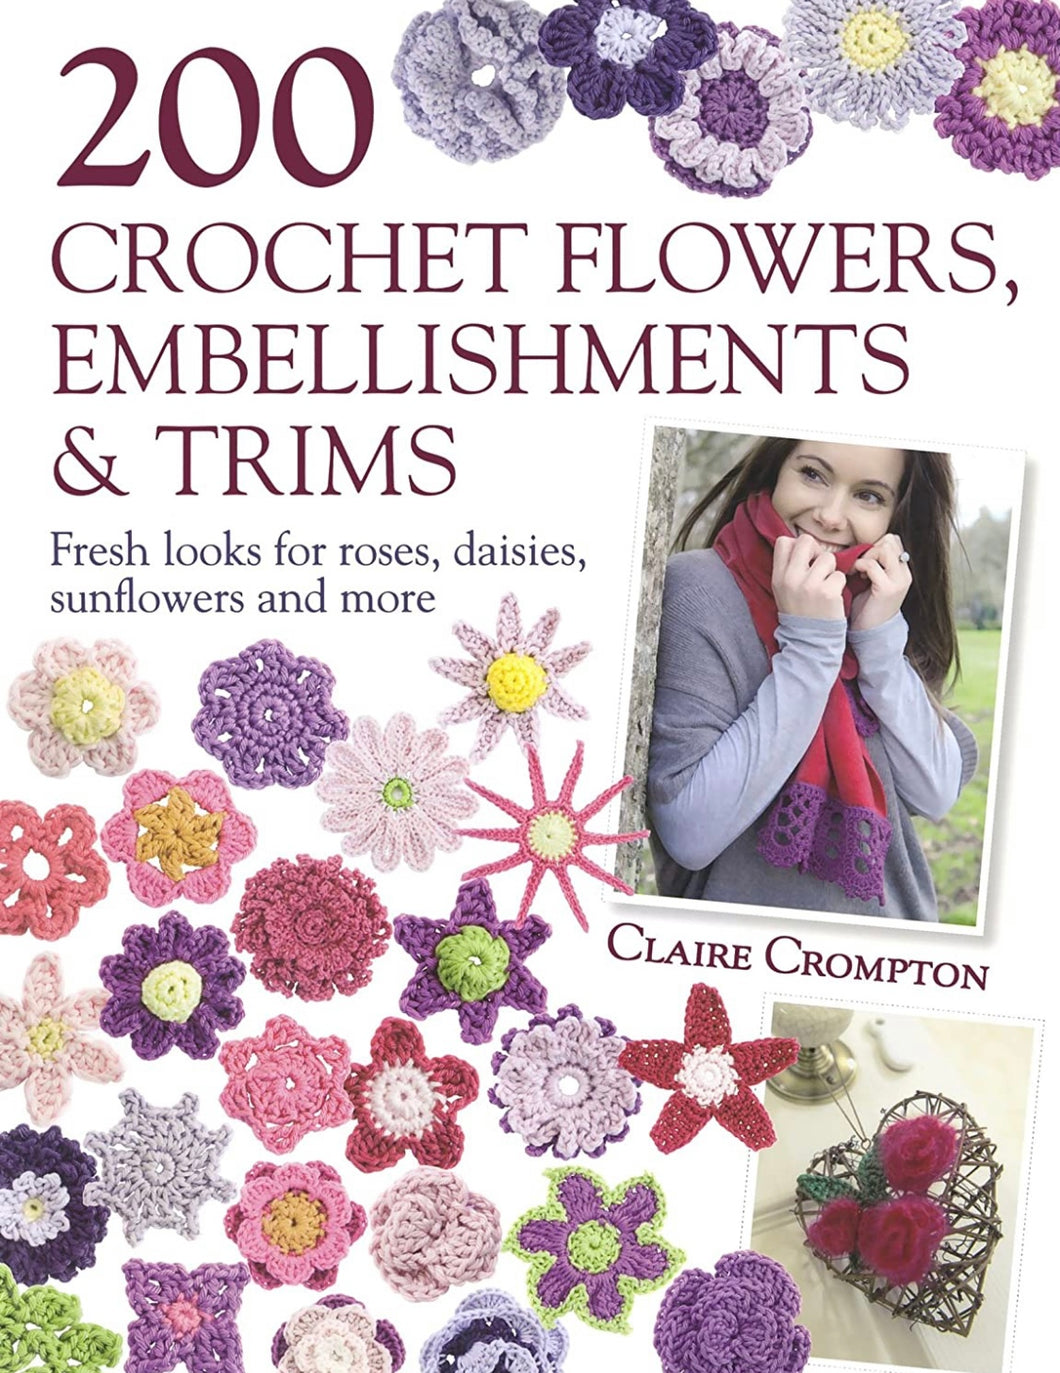 CROCHET BOOK:  200 Crochet Flowers, Embellishments & Trims: Fresh Looks for Roses, Daisies, Sunflowers and More by Claire Crompton